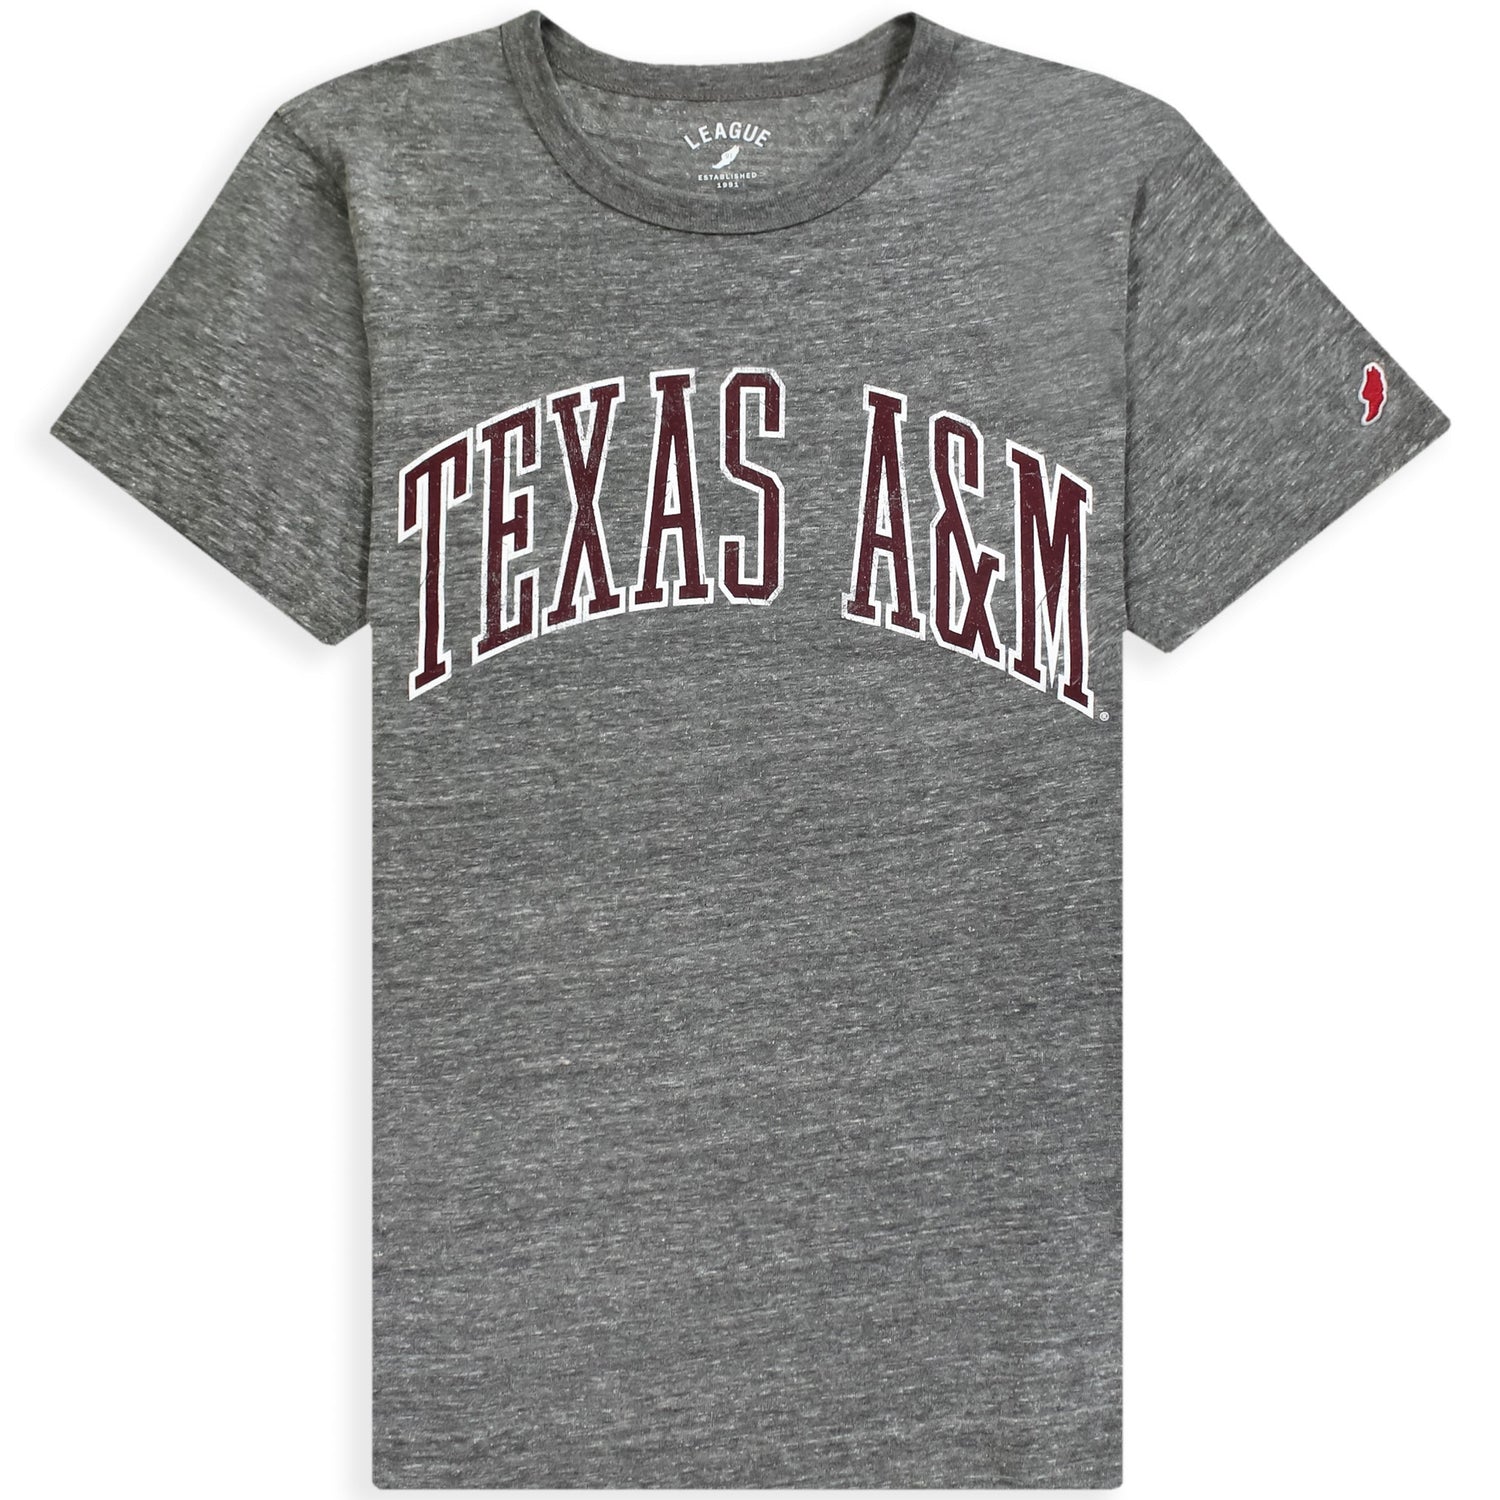 Texas A&M League Arched Victory Falls T-Shirt